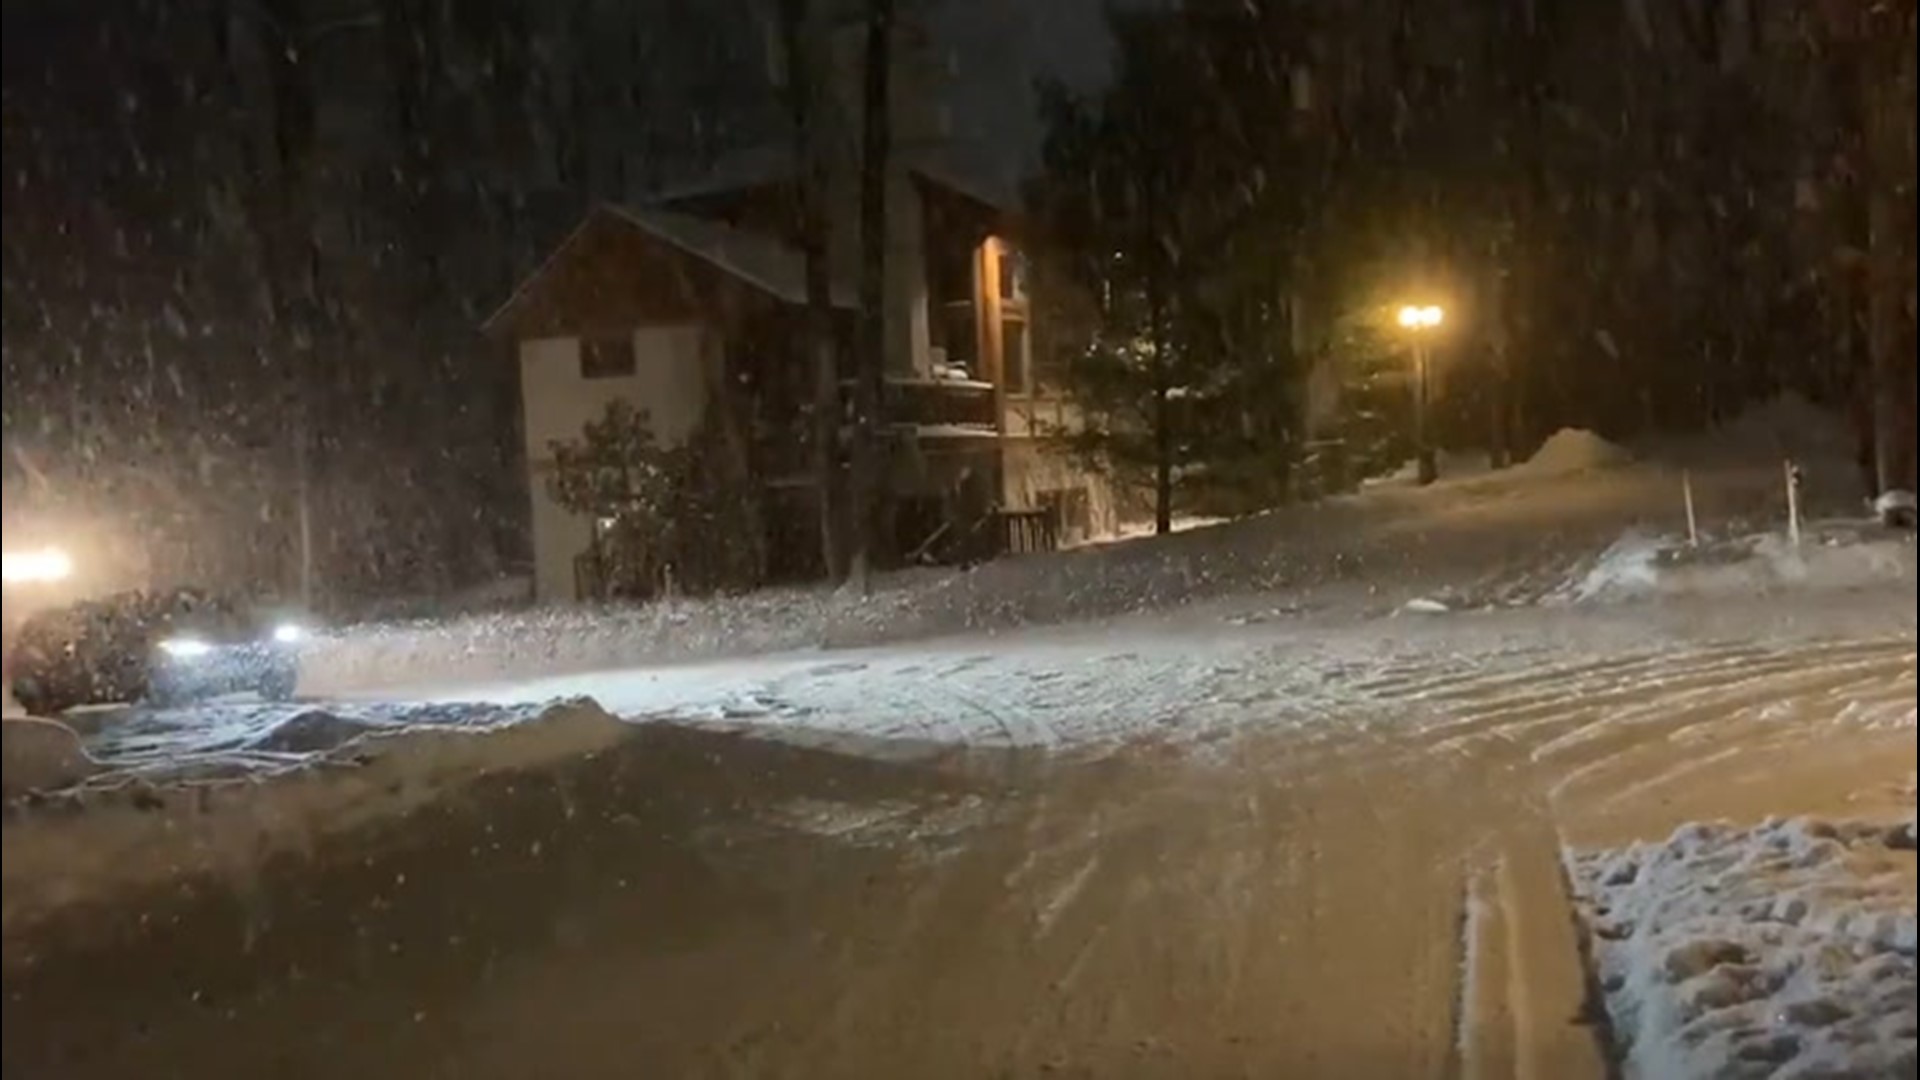 Just as the roads get cleared, the heavy lake-effect snow adds a new layer atop the streets of Boyne Mountain, Michigan, on the night of Jan. 19.